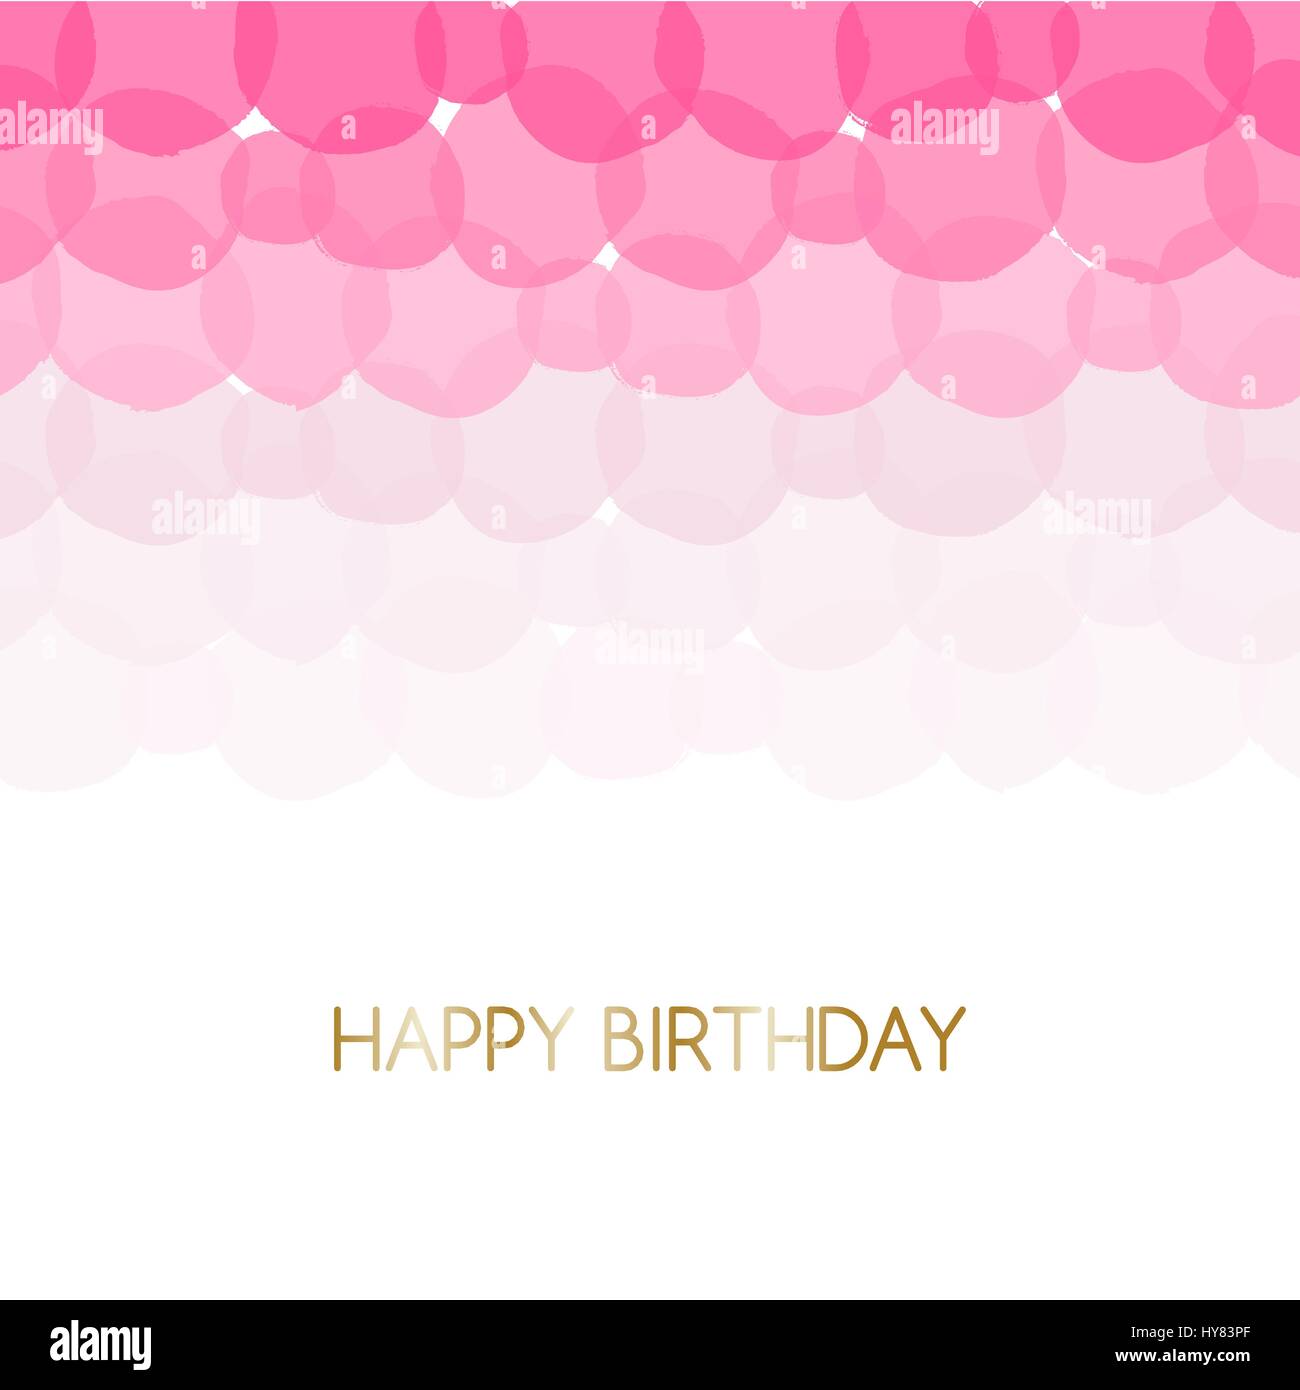 Birthday greeting card design with text "Happy Birthday" in gold